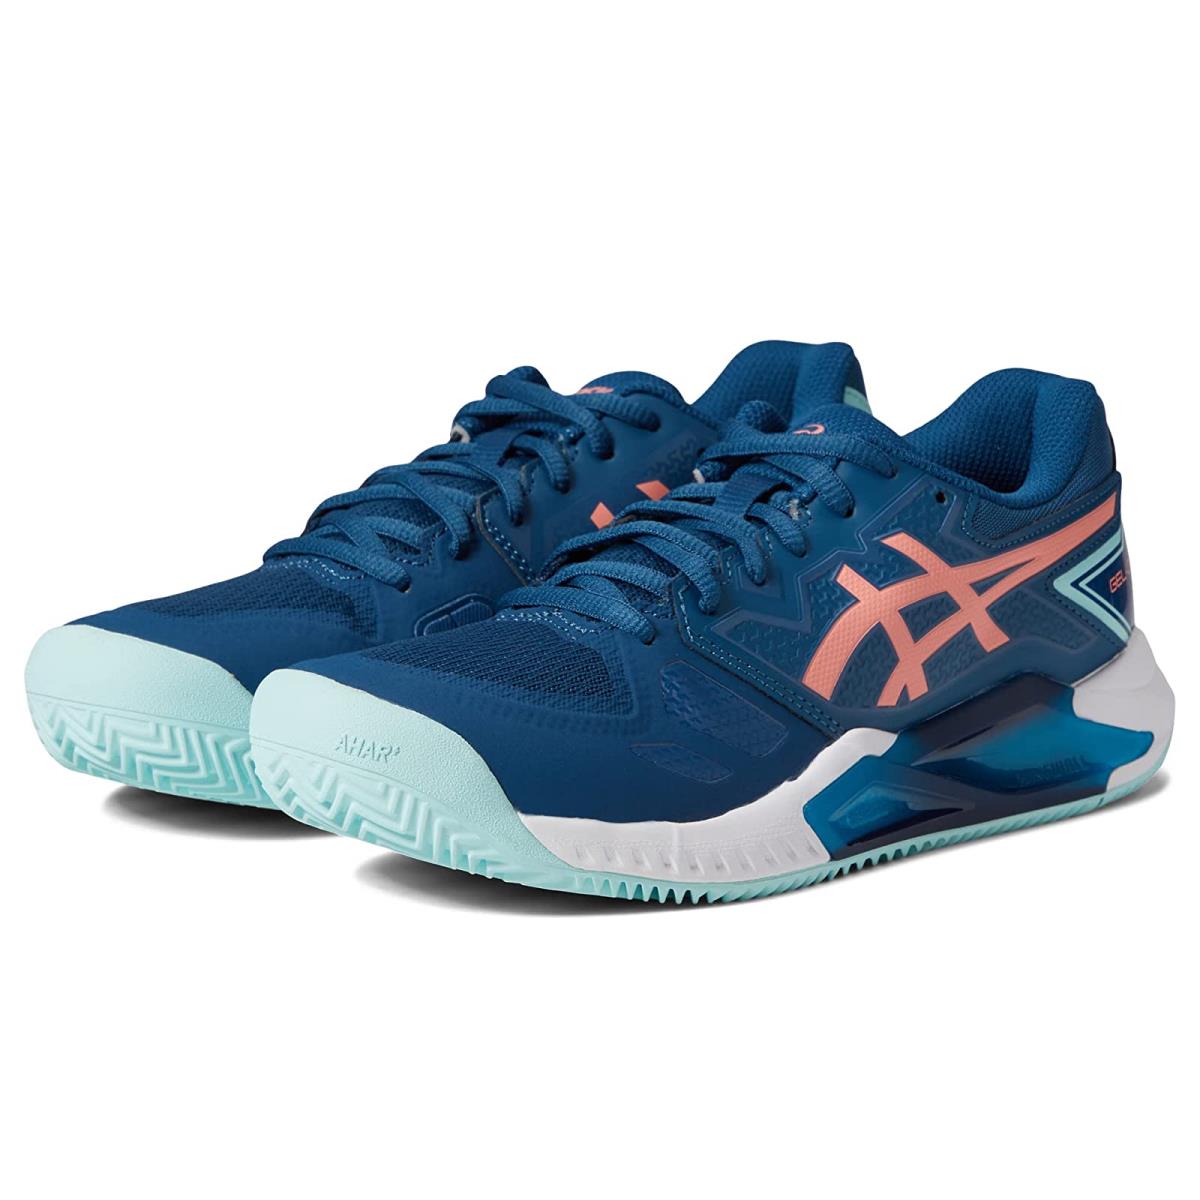 Woman`s Sneakers Athletic Shoes Asics Gel-challenger 13 Clay Light Indigo/Guava